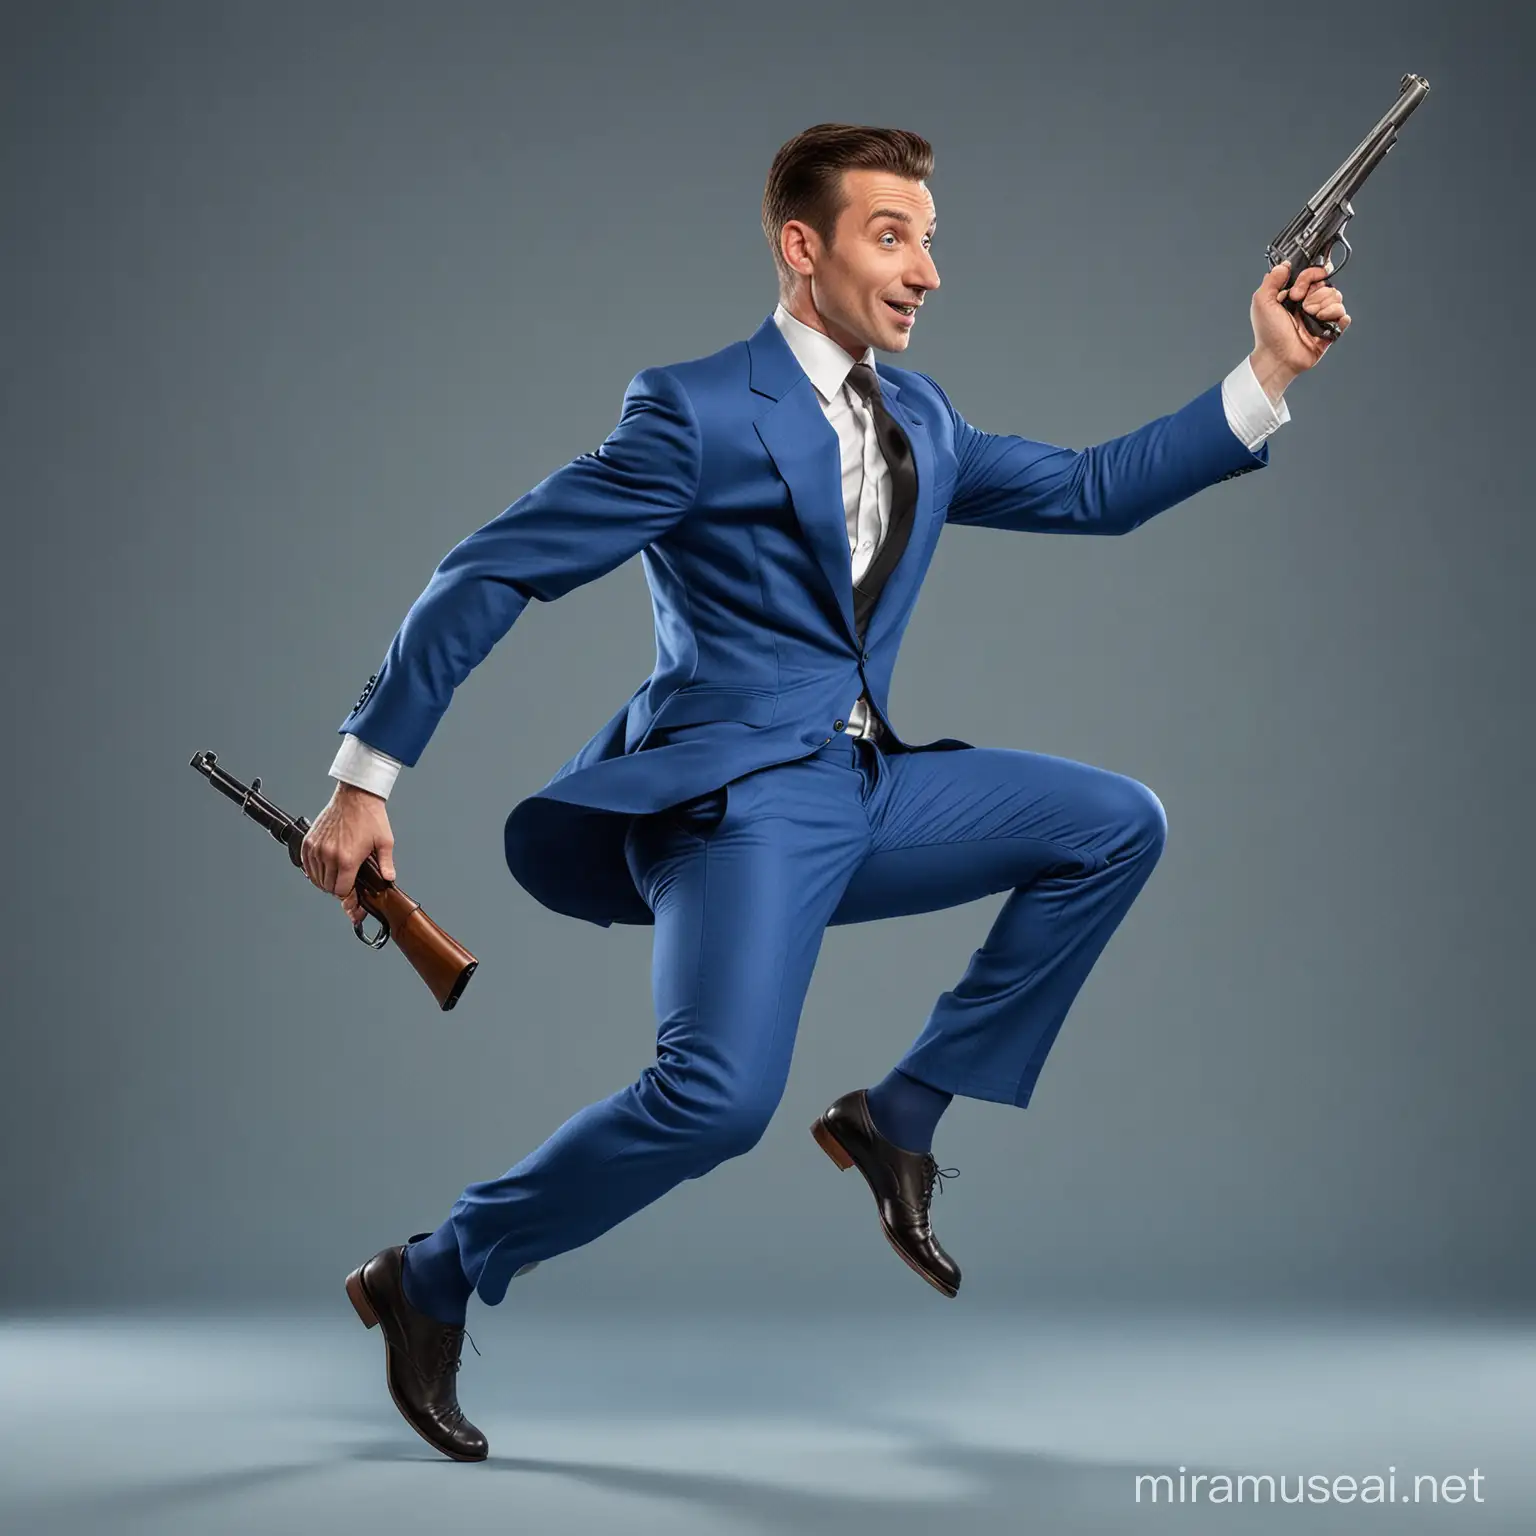 A caricature man full body wearing a blue suit holds a gun between his legs from behind while leaning back in an acrobatic move
. He appears to be posing for a photo, adding an element of elegance to his pose.